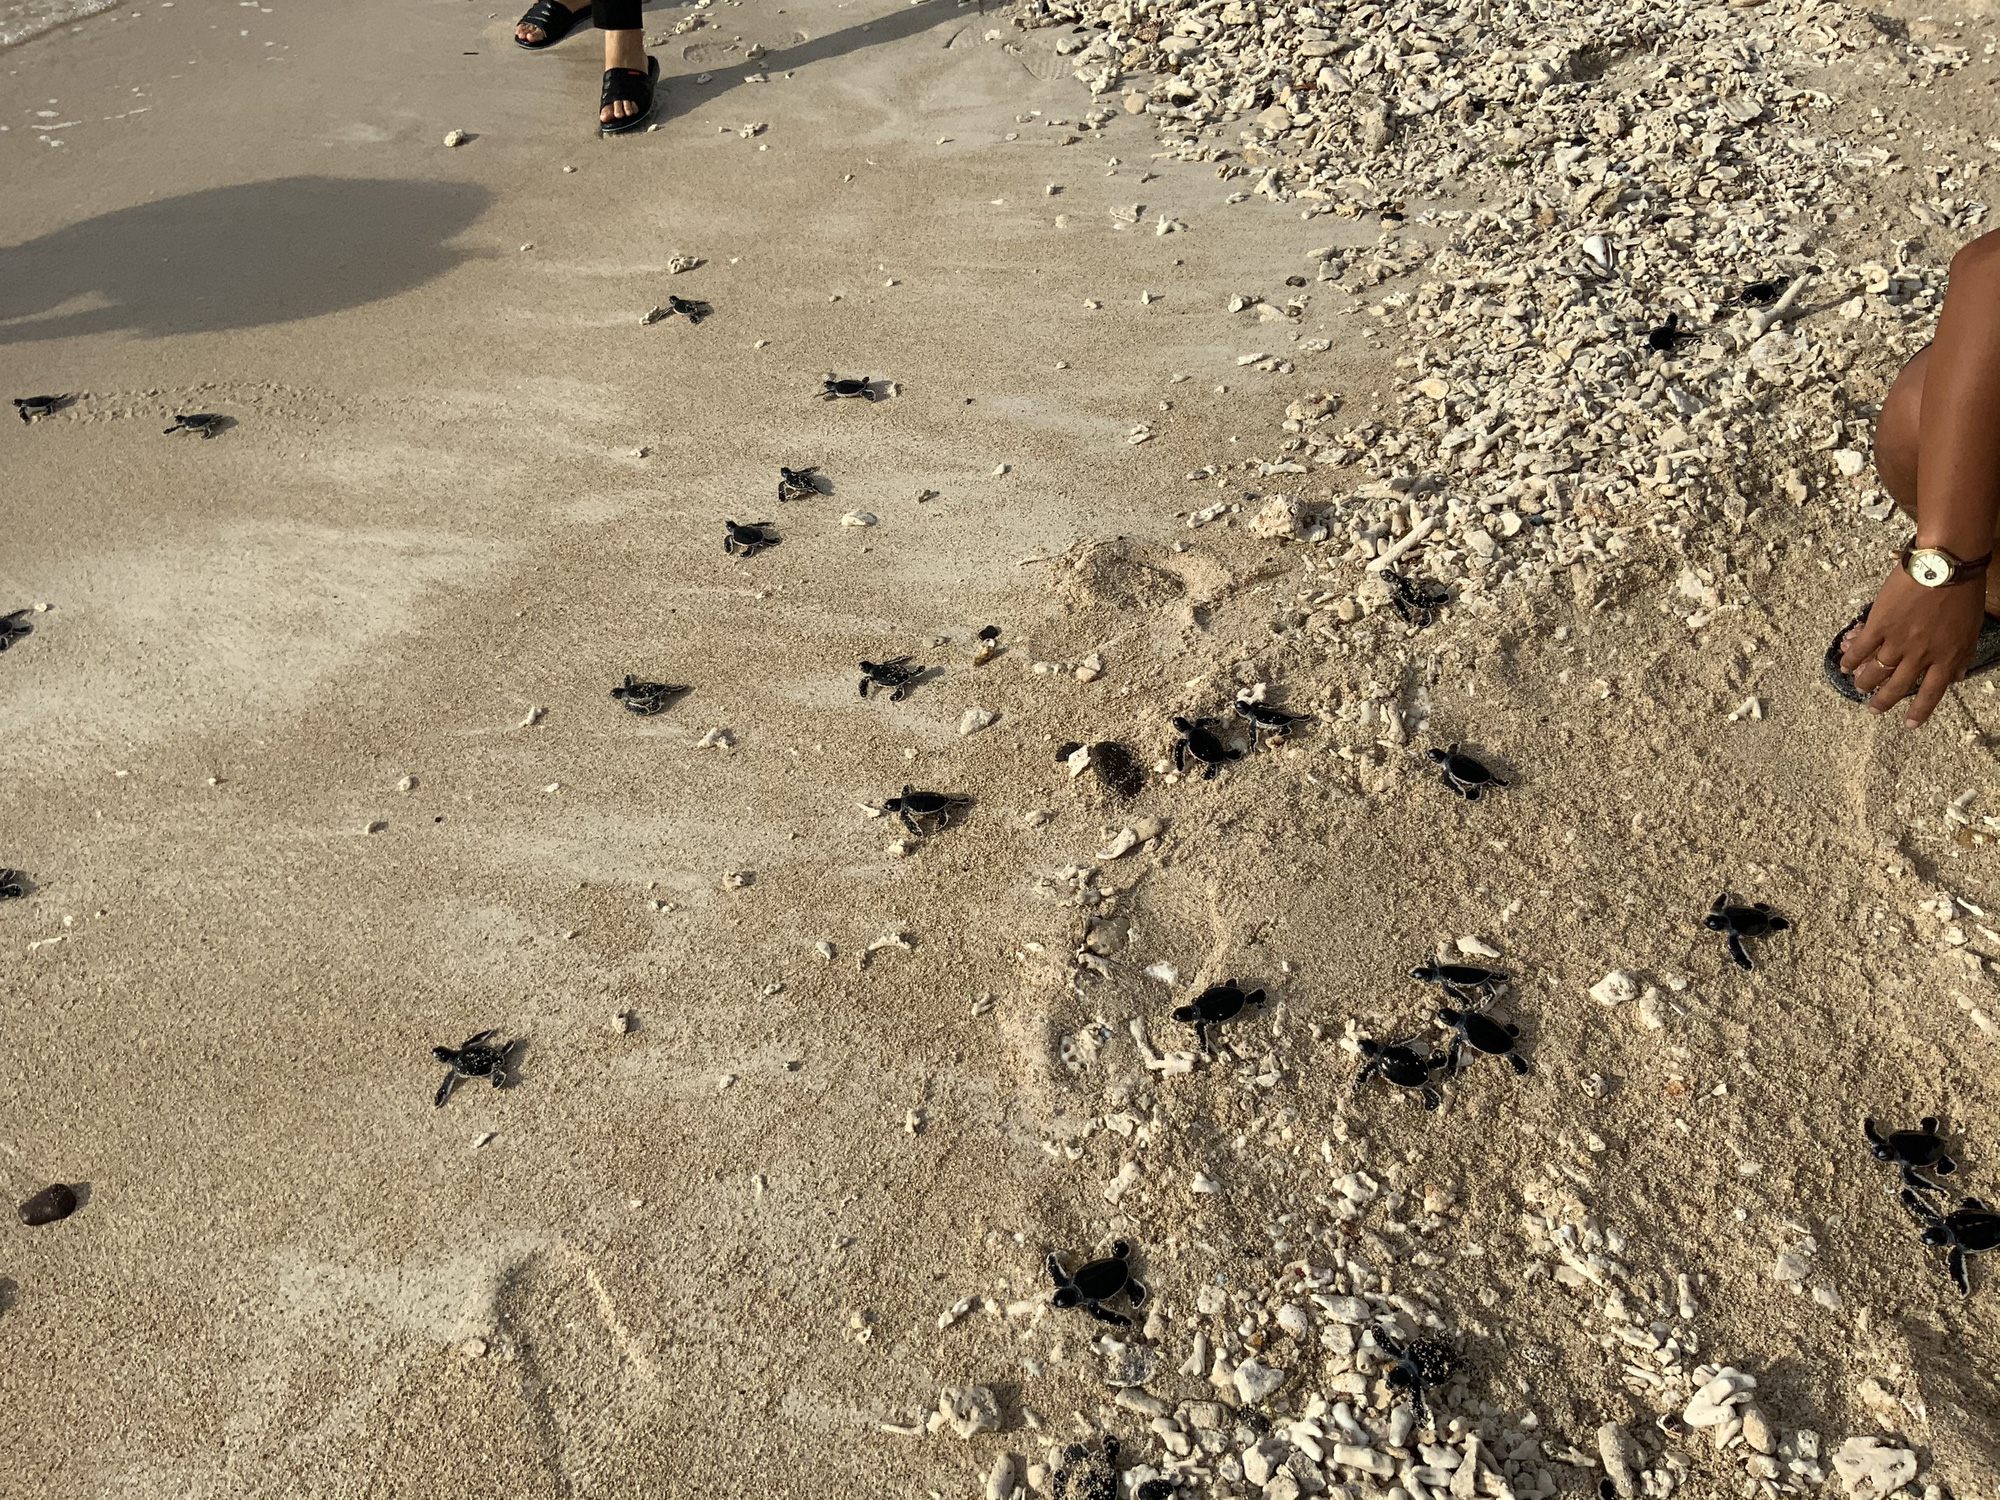 Baby sea turtles are returned to the ocean on Hon Tranh Island off Binh Thuan Province, Vietnam, August 17, 2020. Photo: Tri Beo